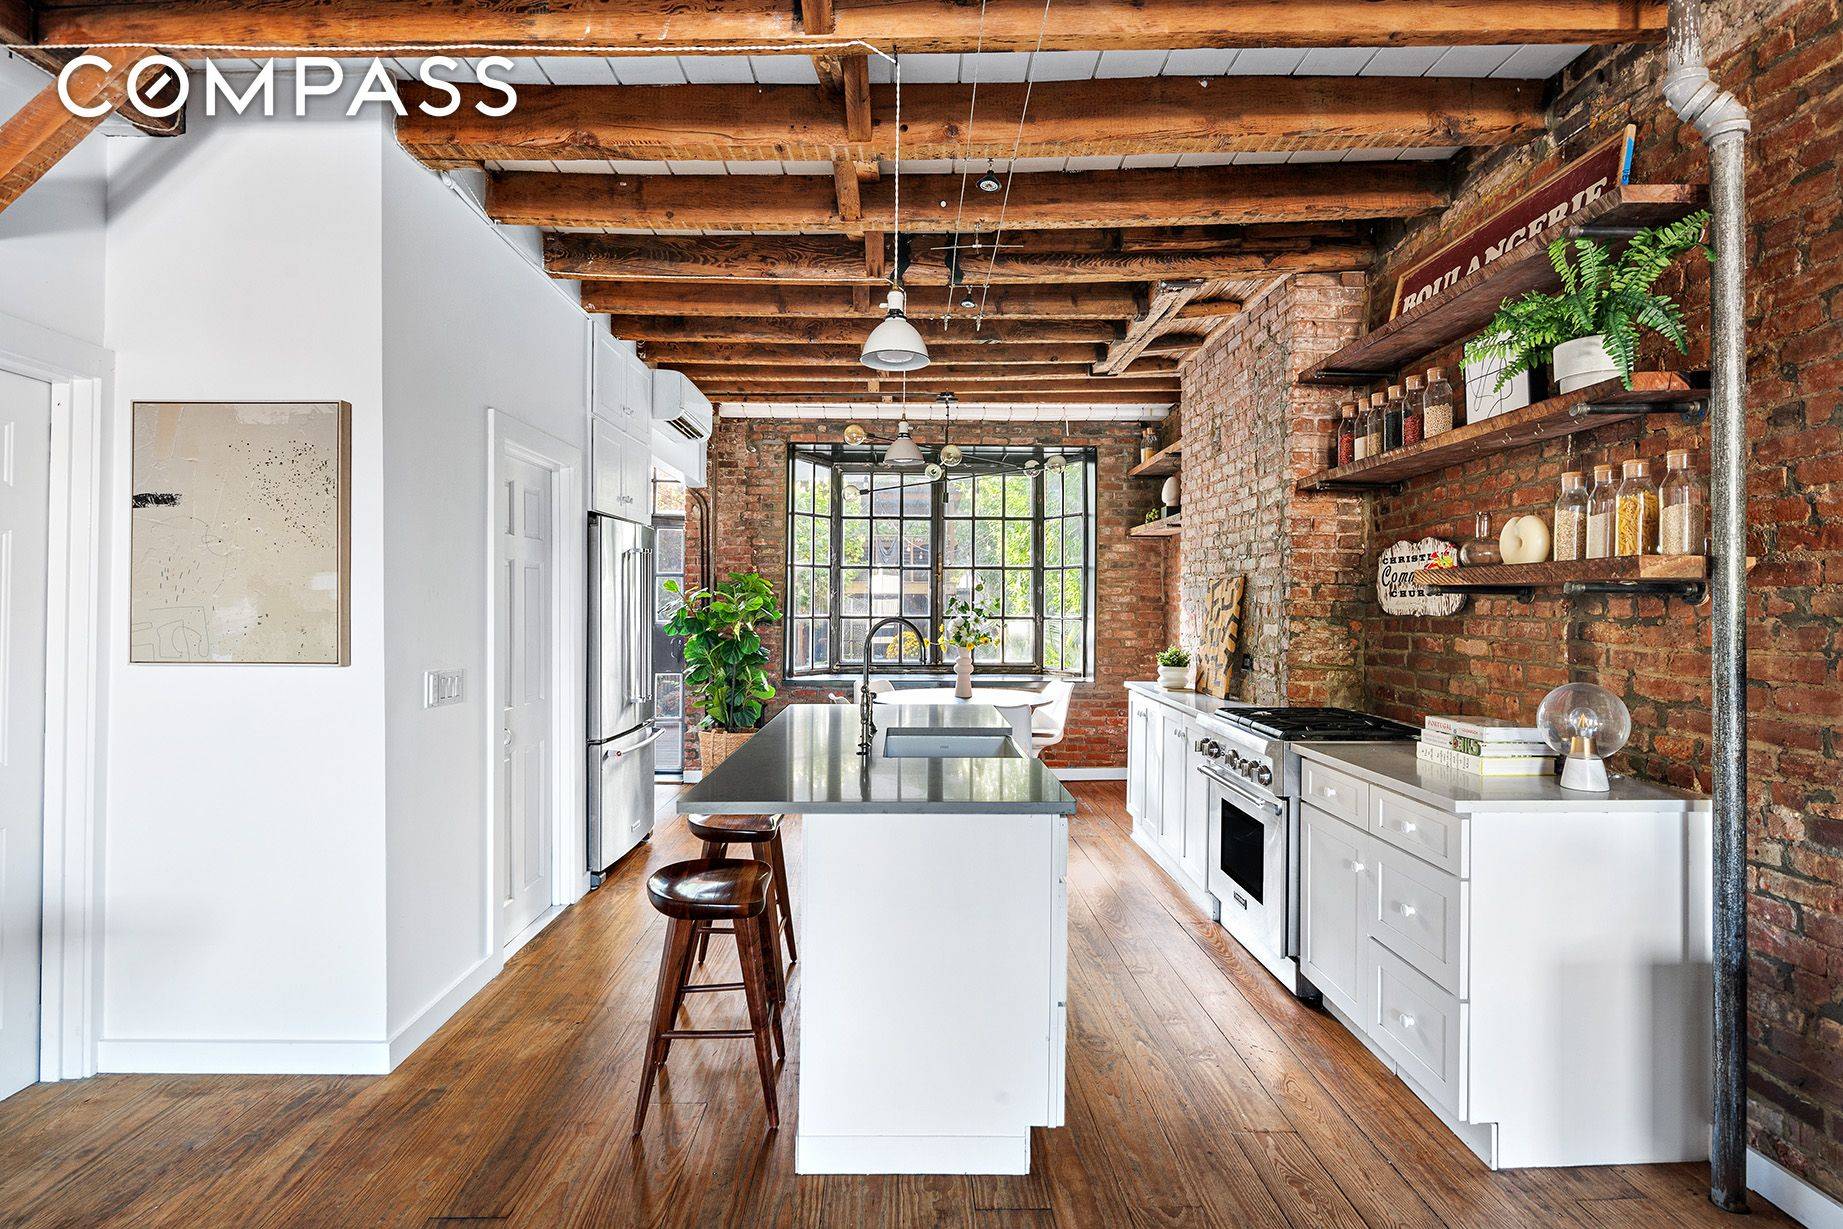 Welcome to 256 Van Brunt Street, a spacious and unique 3 story townhouse in the heart of desirable Red Hook.